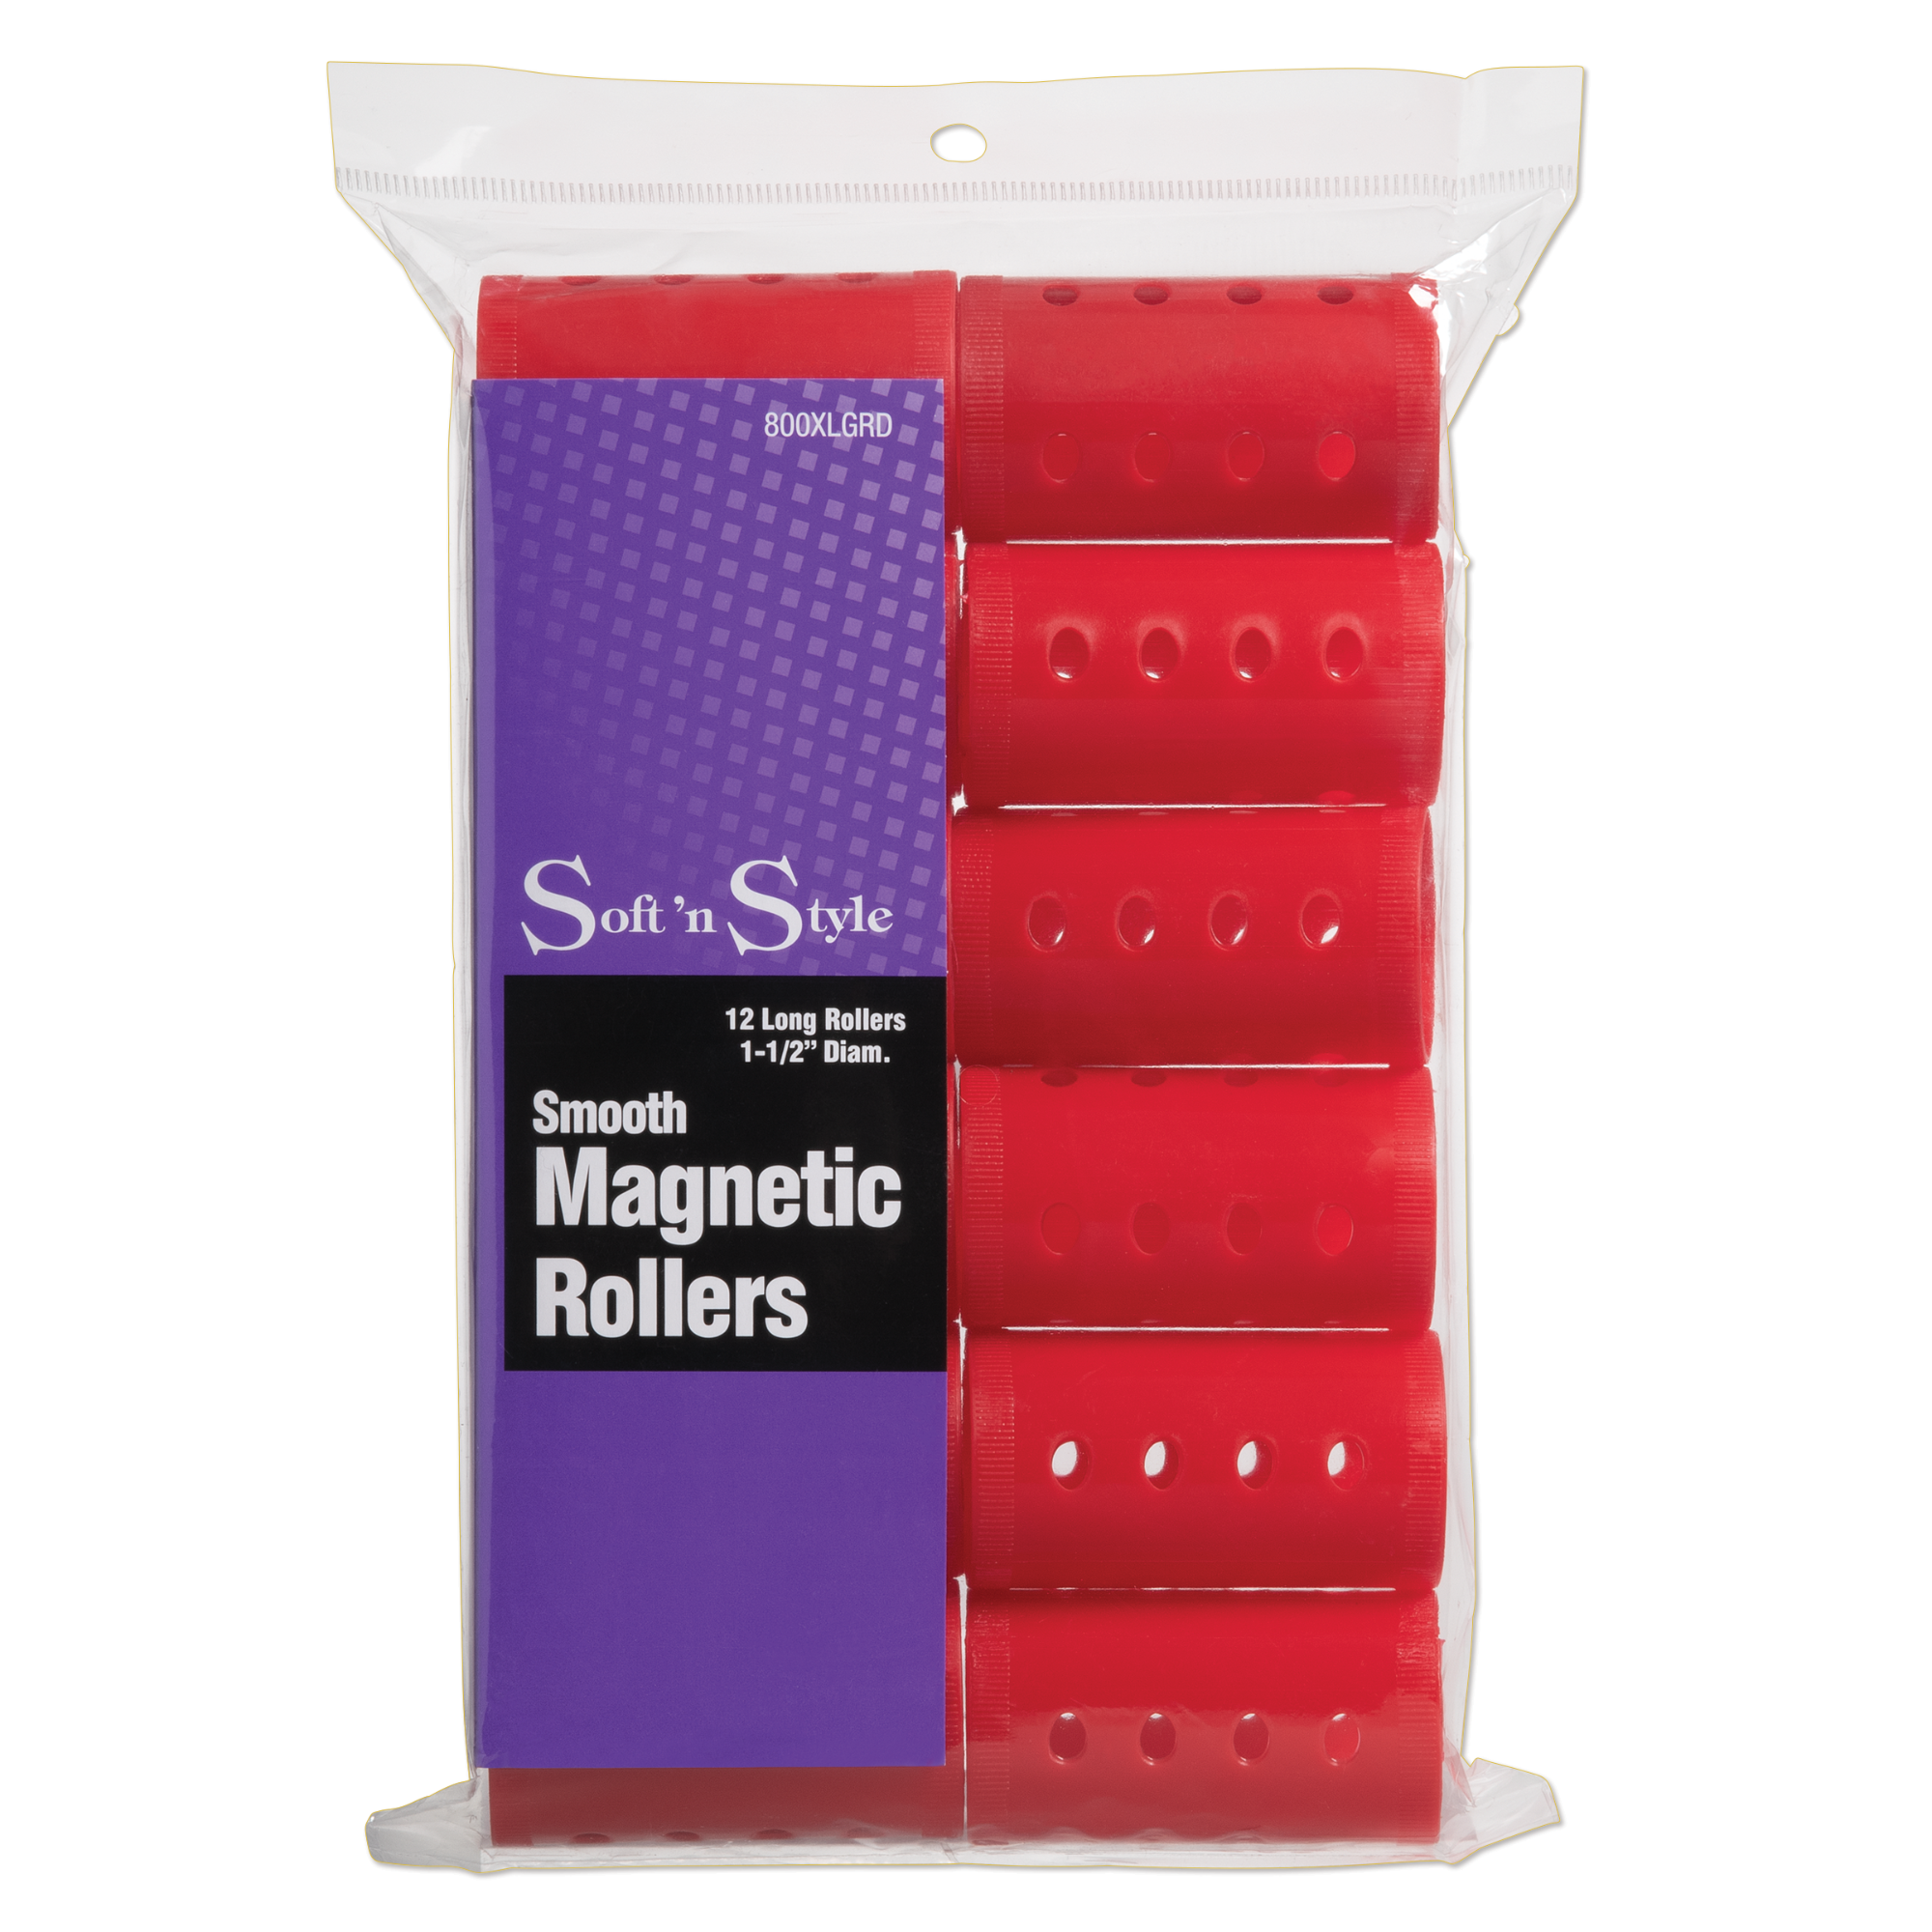 Smooth Magnetic Rollers, Long Red - 1-1/2"